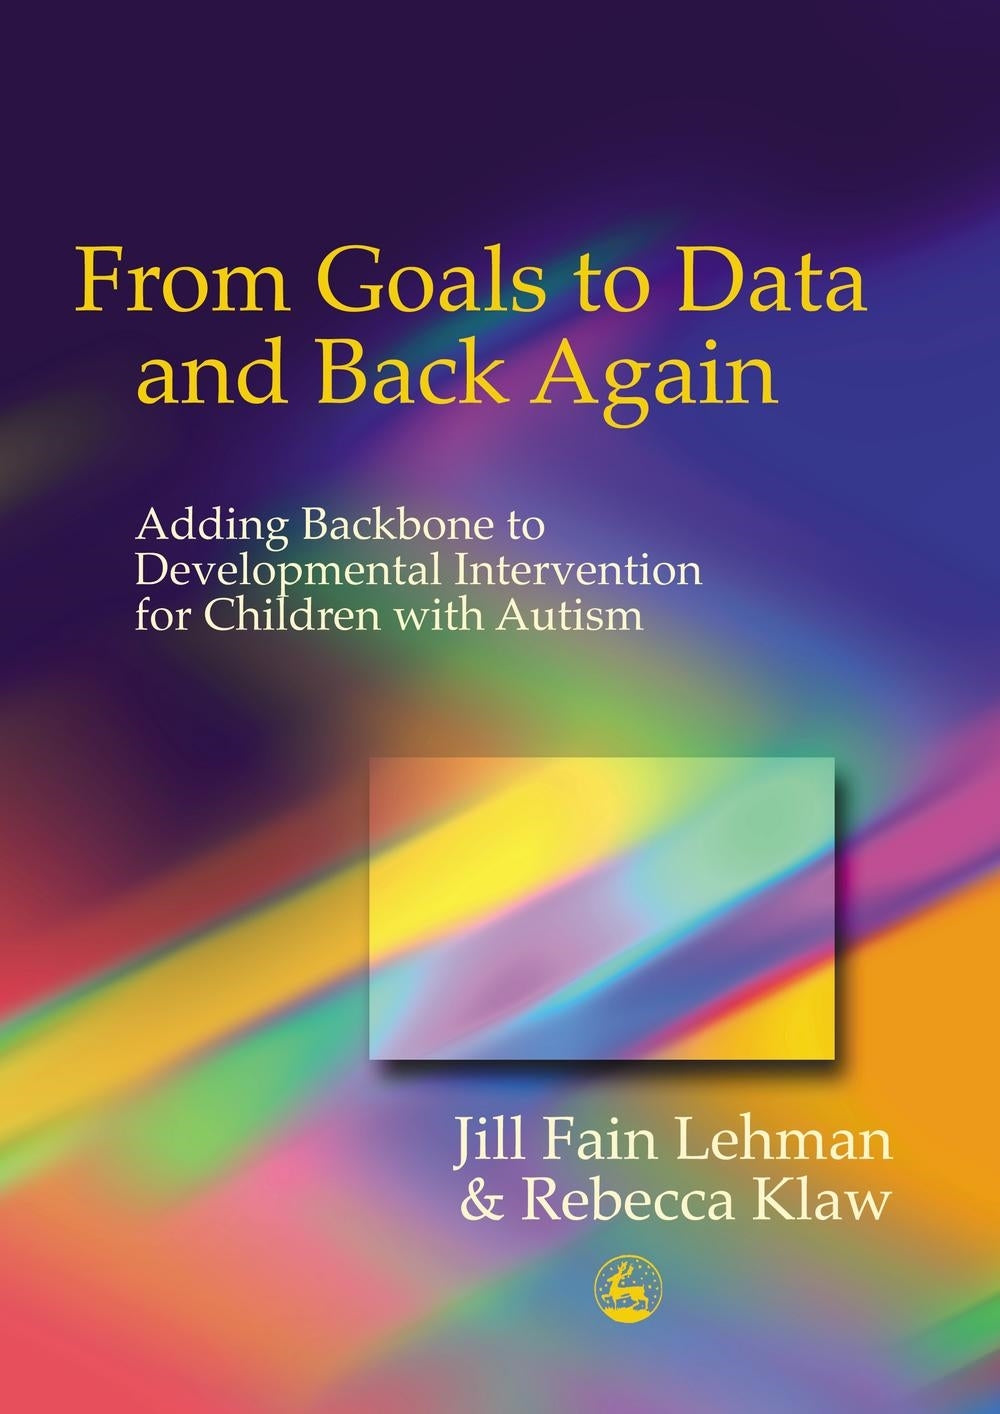 From Goals to Data and Back Again by Jill Fain Lehman, Rebecca Klaw